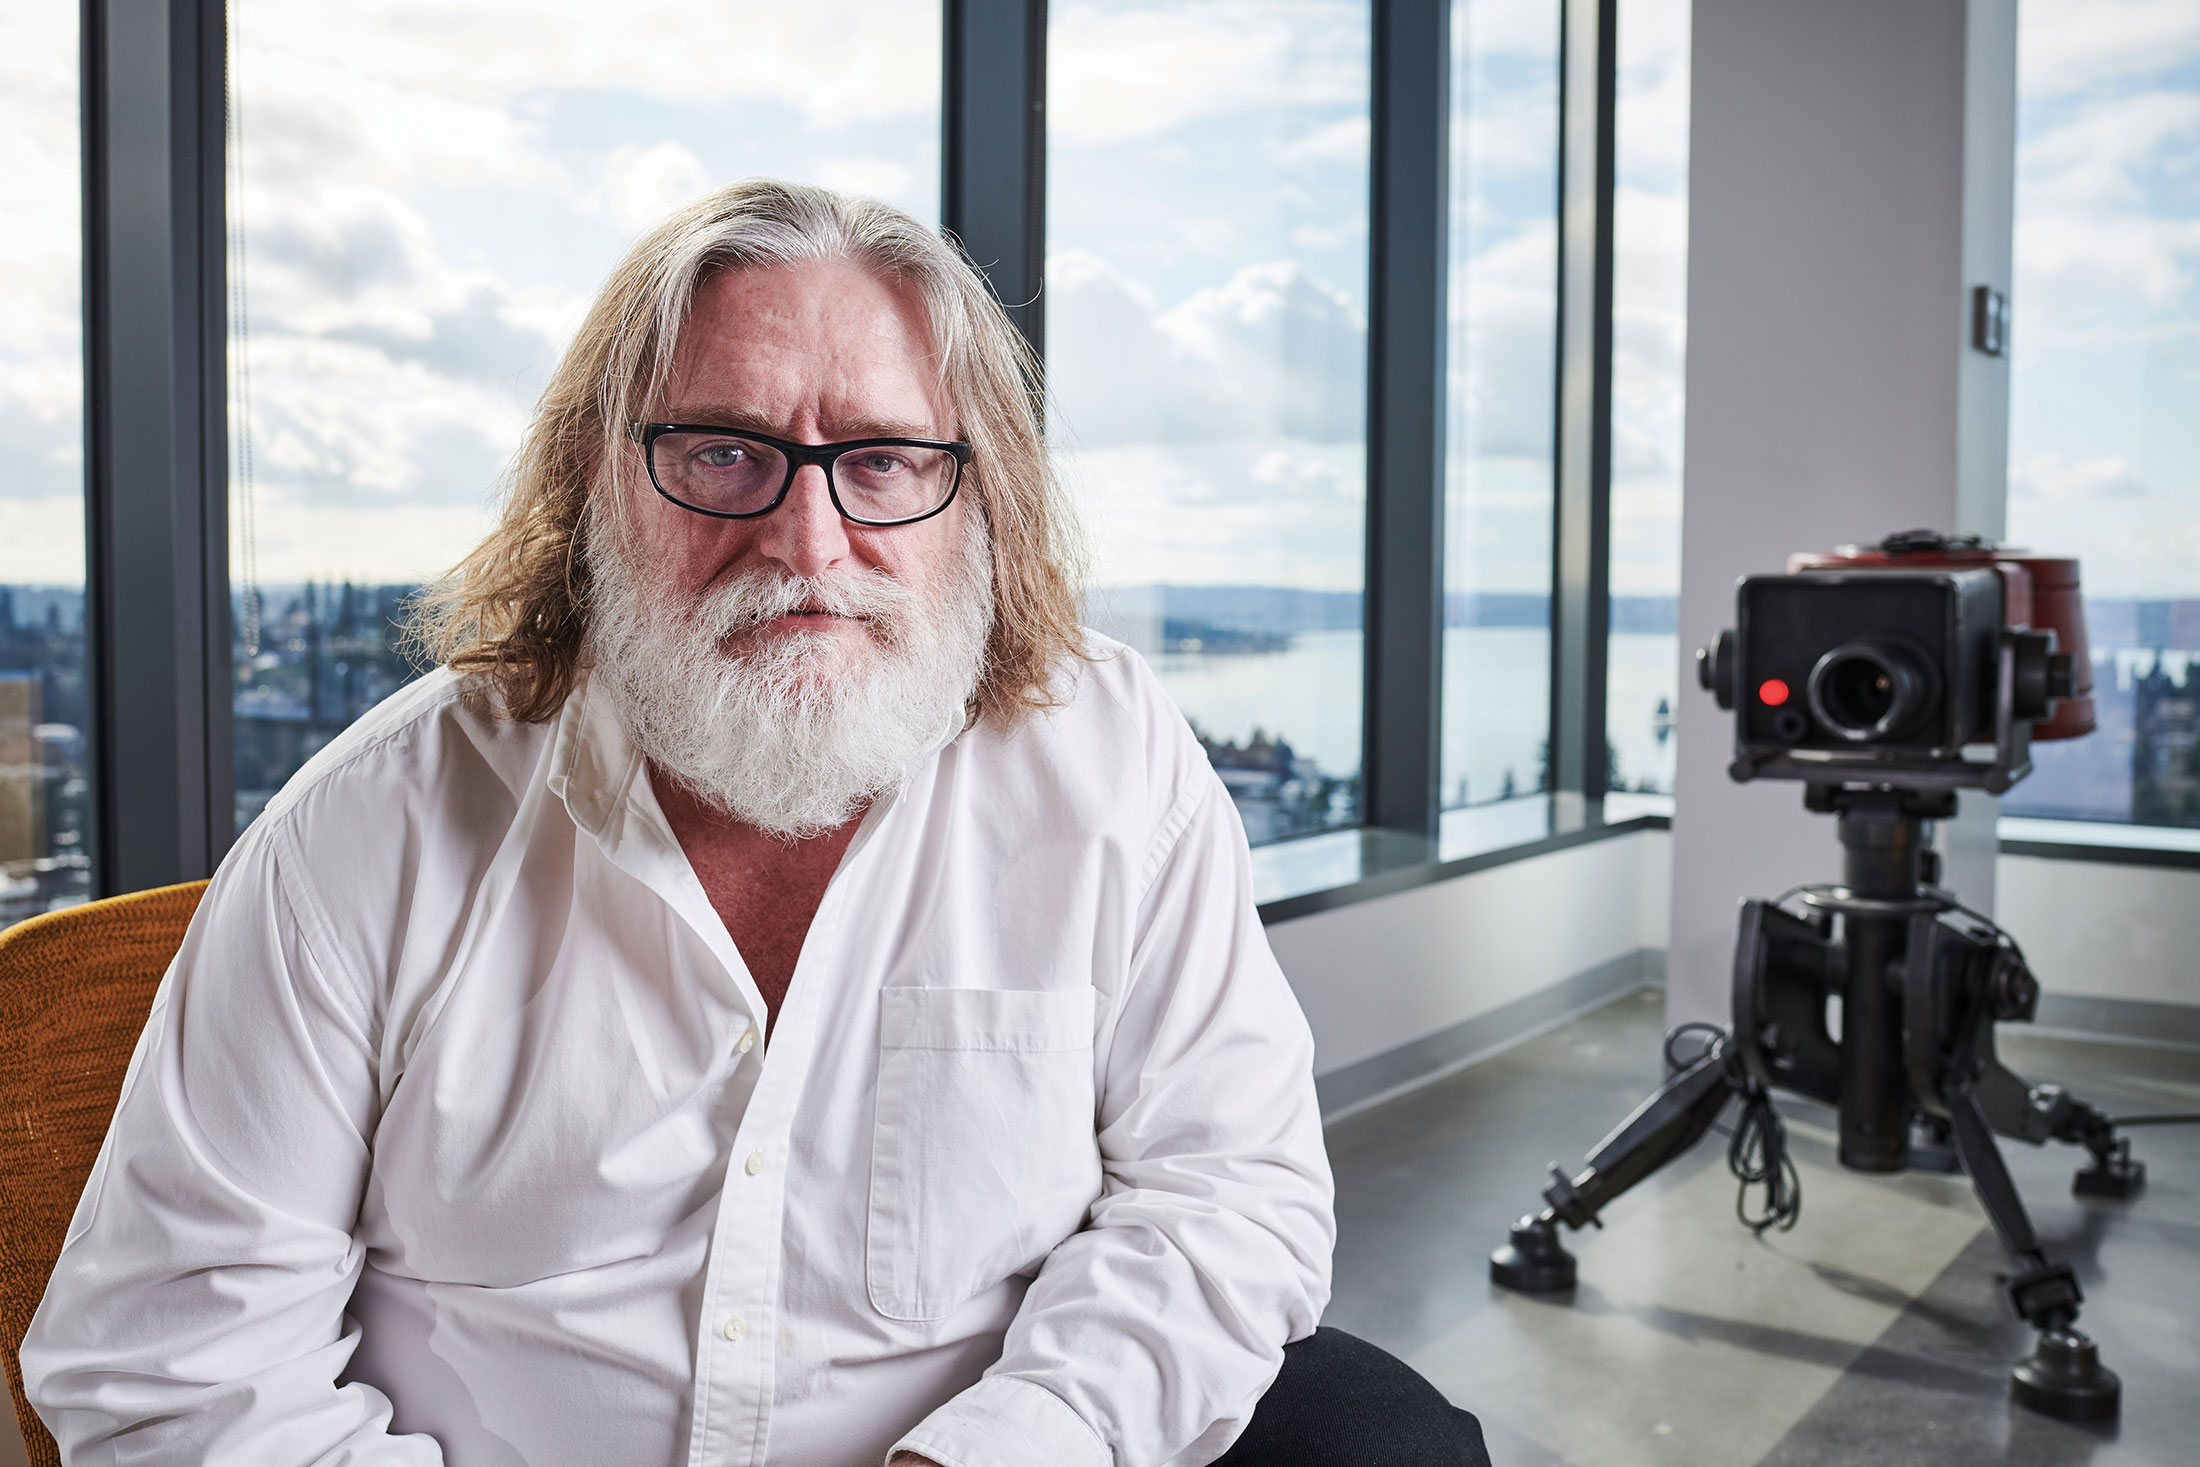 Gabe Newell talks Steam Deck, crypto risks and why the PC industry